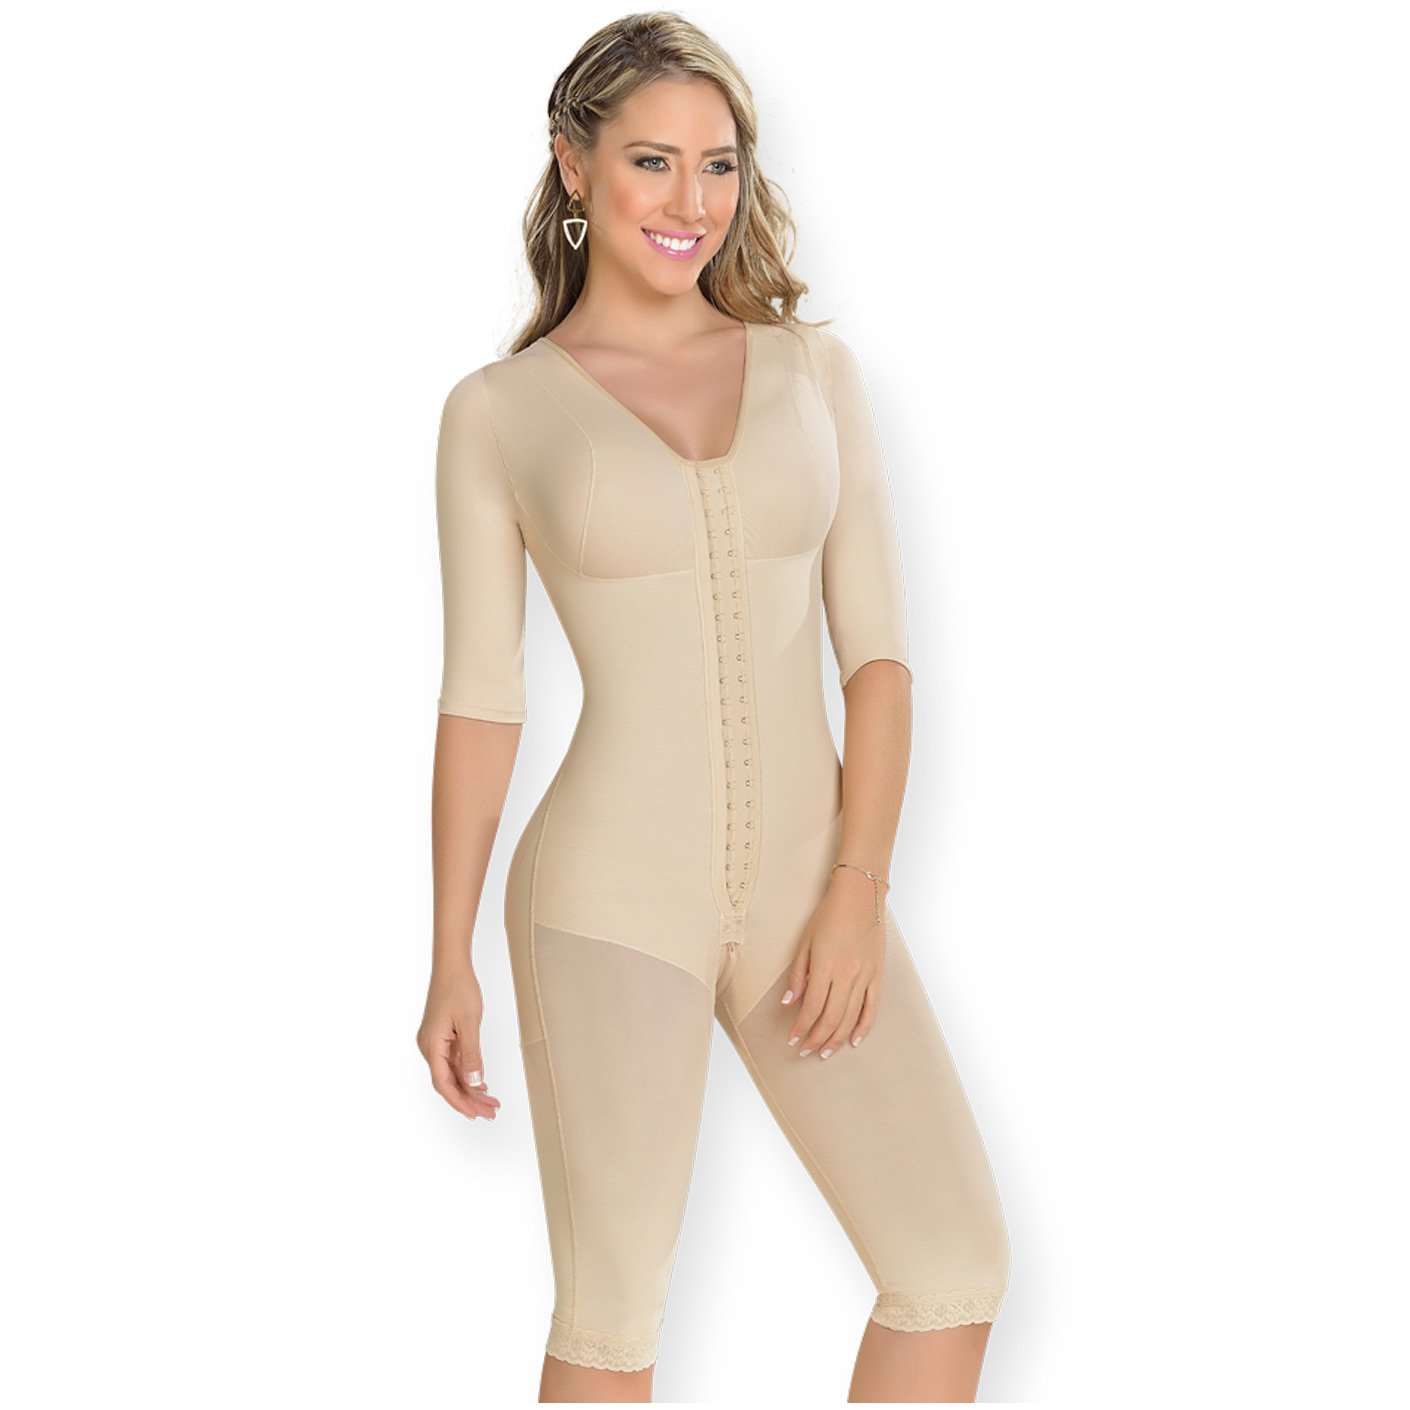 M&D Shapewear: 0161 - Post Surgery Full Body Above Knees Long Sleeved -  Showmee Store